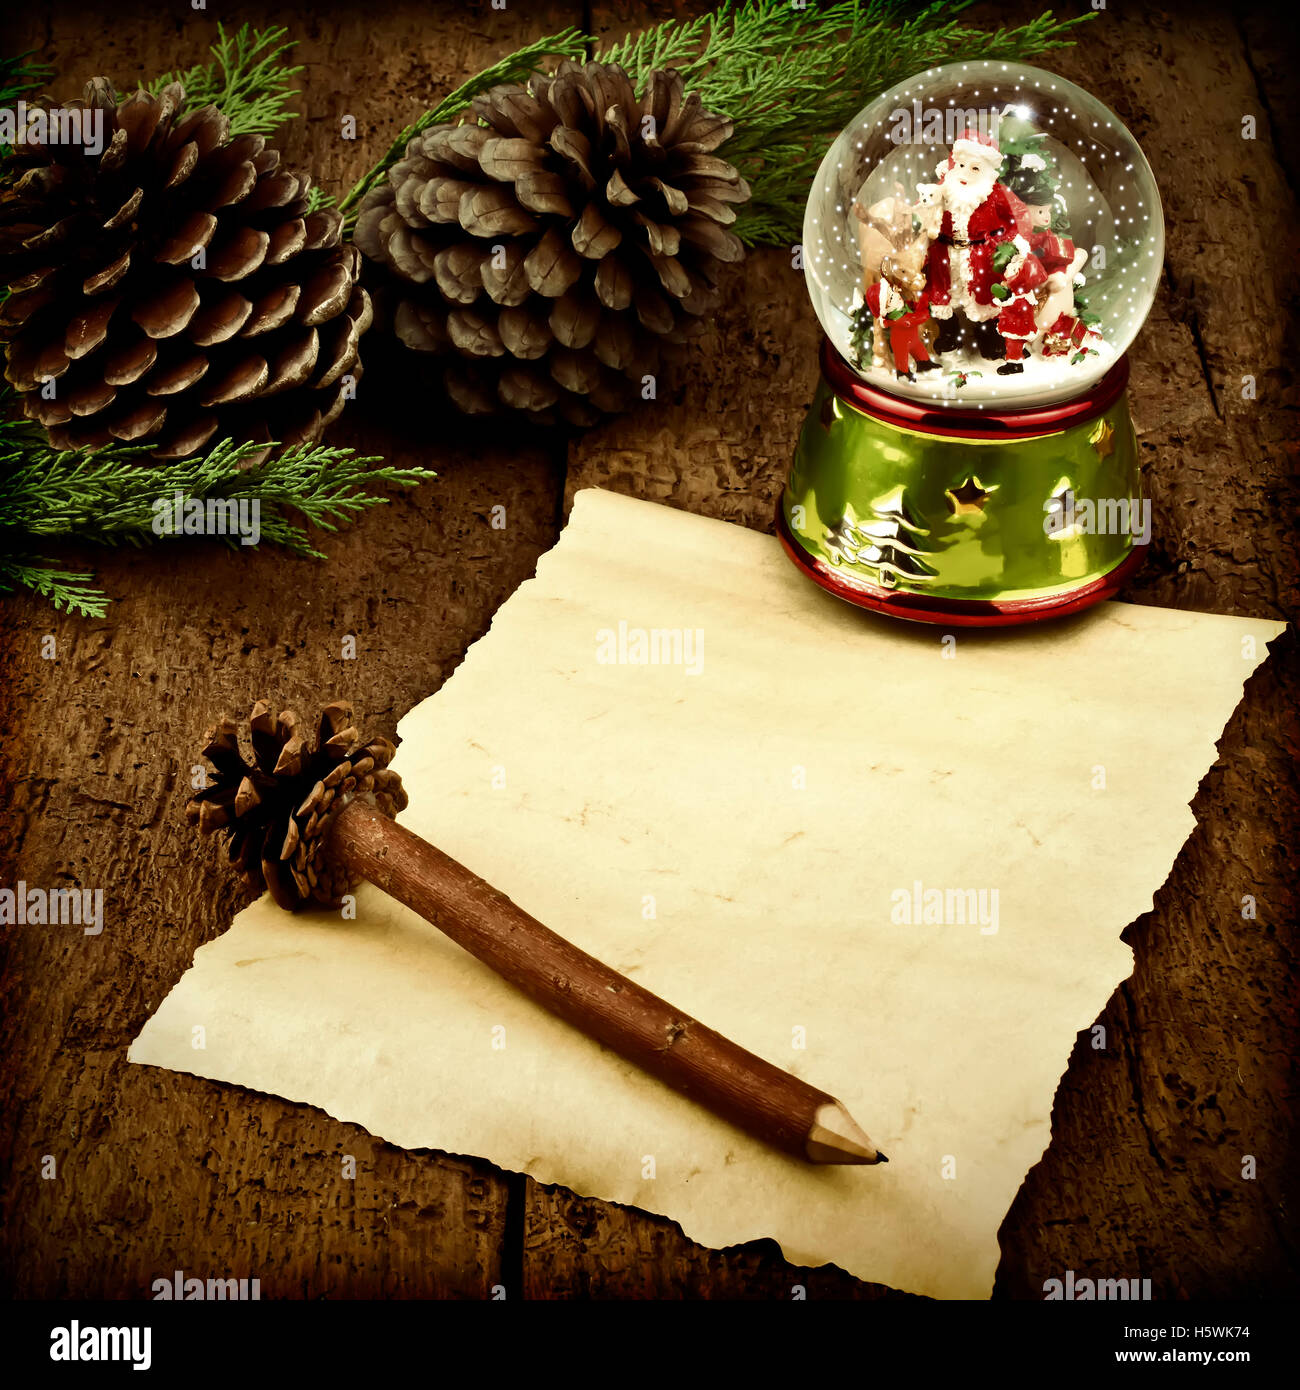 https://c8.alamy.com/comp/H5WK74/letter-blank-parchment-to-write-santa-or-greeting-the-christmas-time-H5WK74.jpg